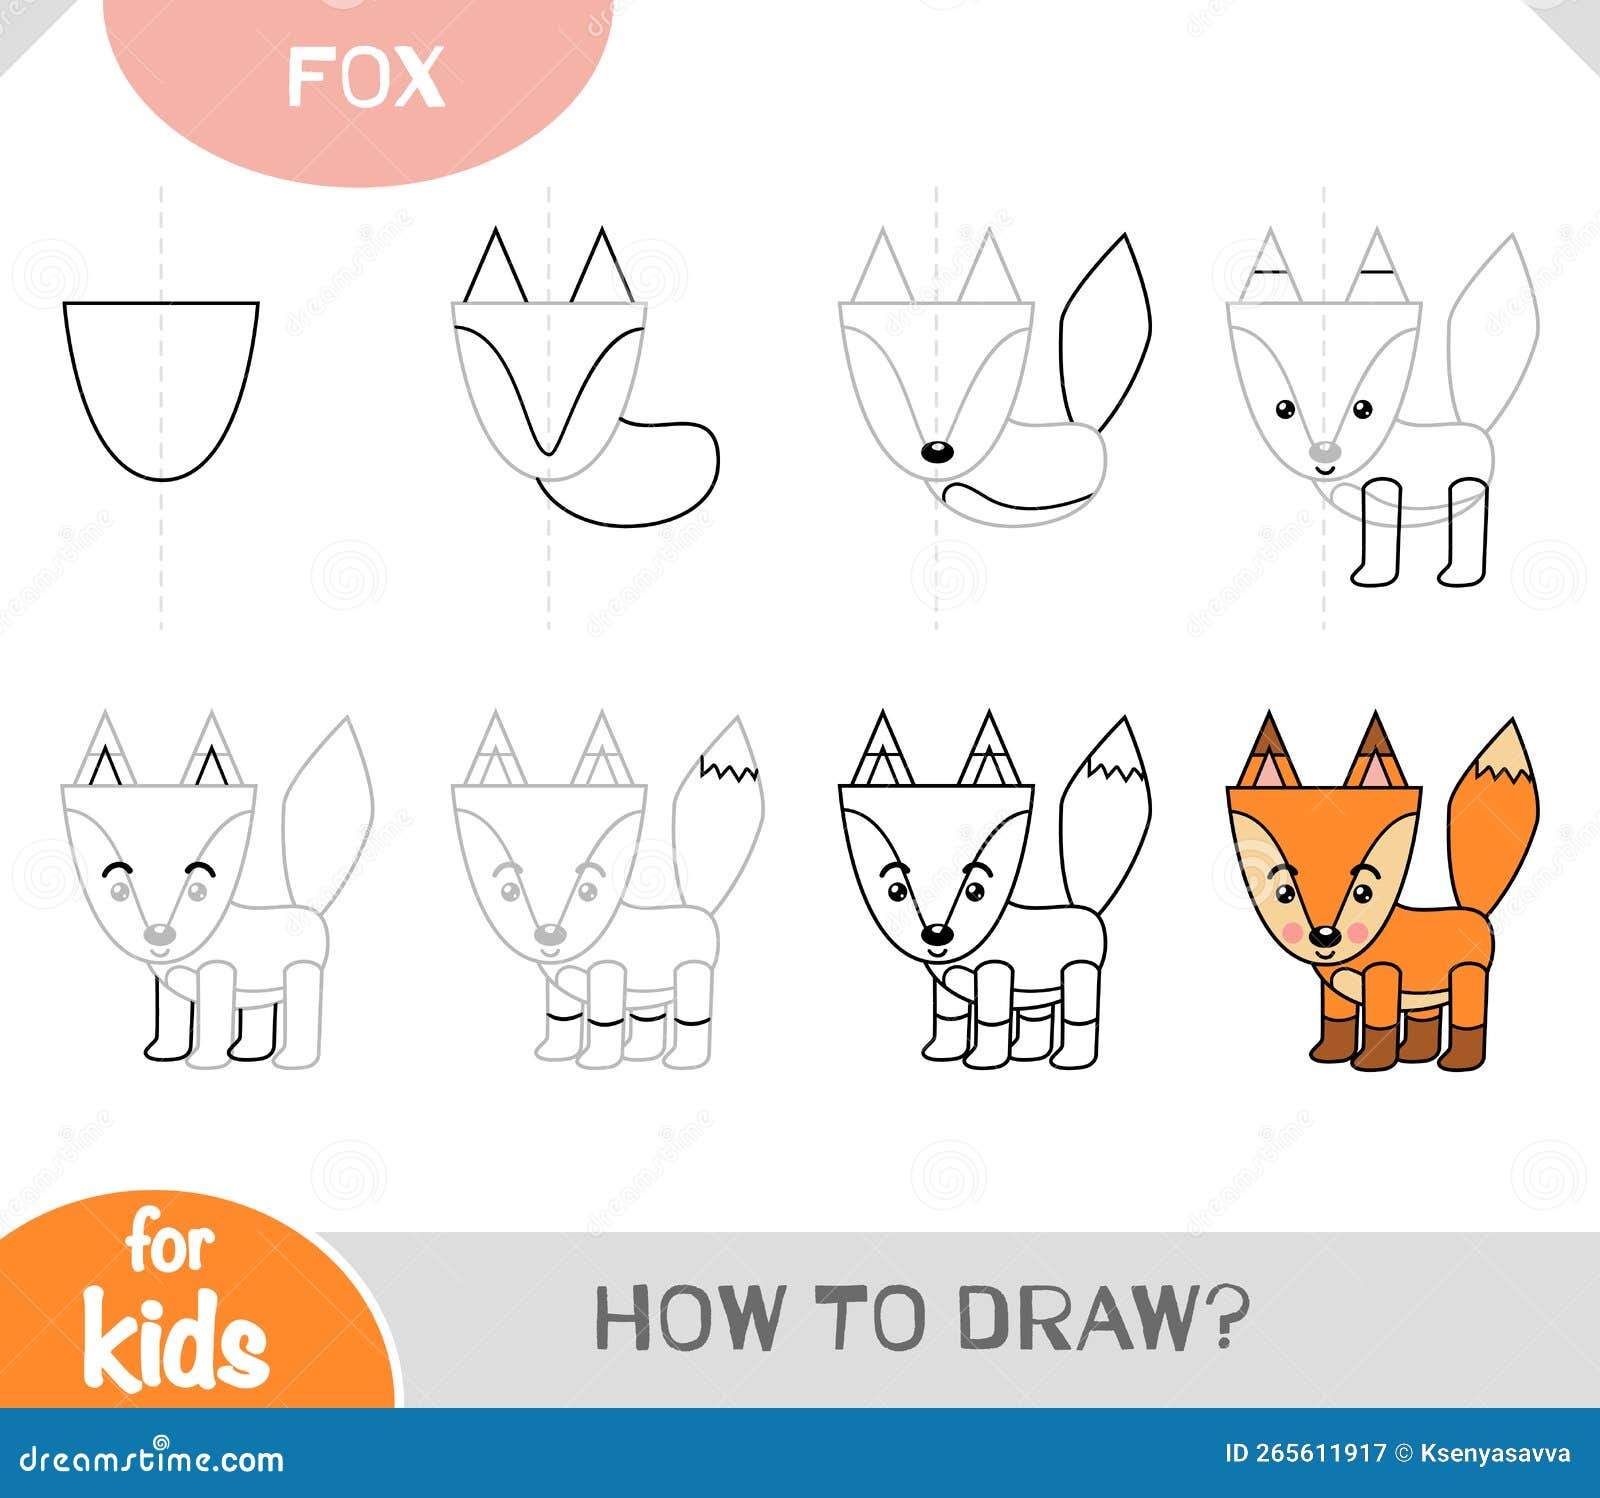 Draw A Fox Easy For Kids, Step by Step, Drawing Guide, by Dawn - DragoArt